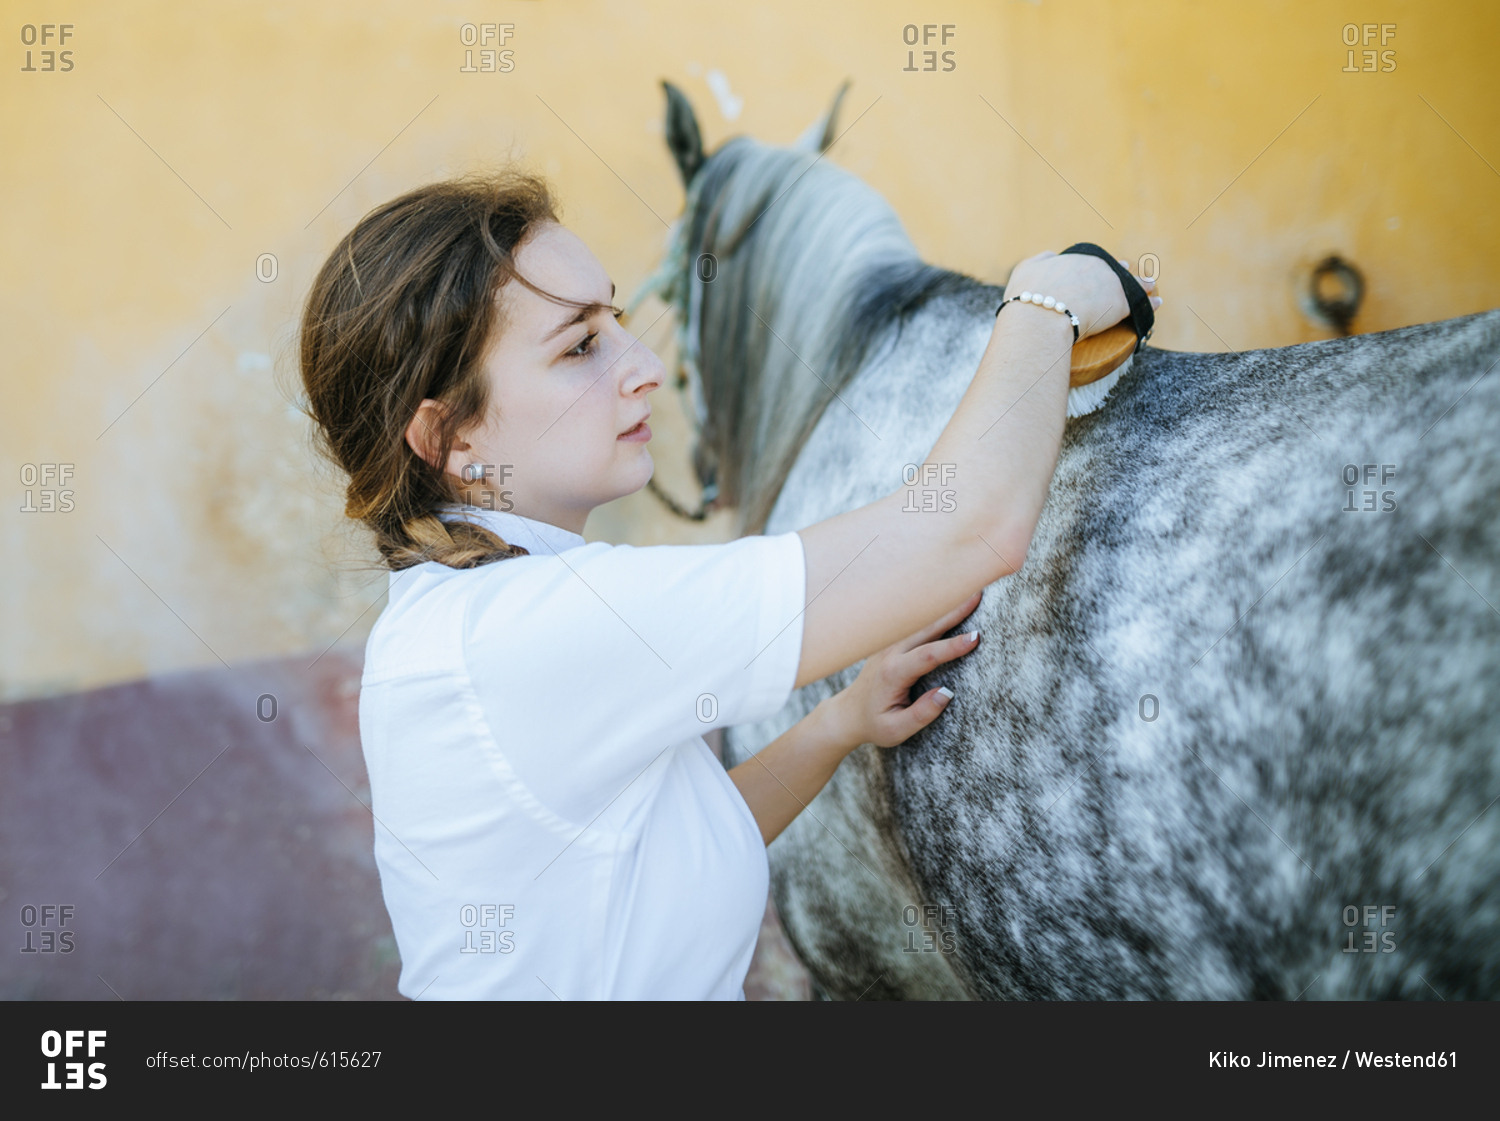 Young woman grooming horse